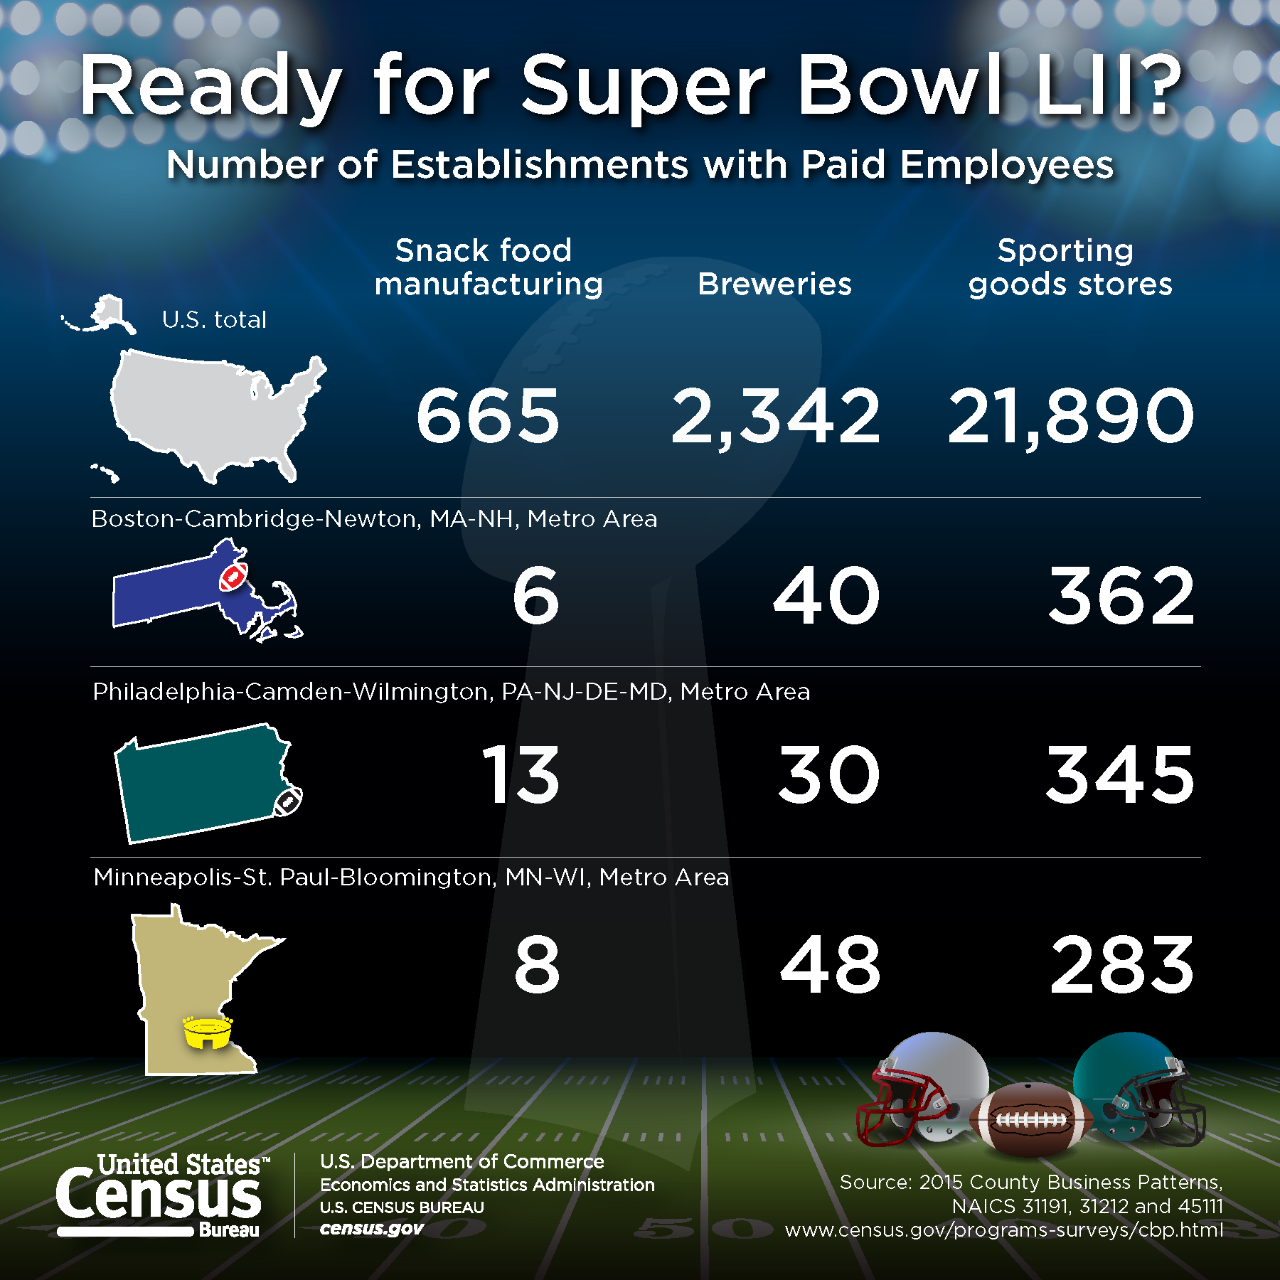 Ready for Super Bowl LII?